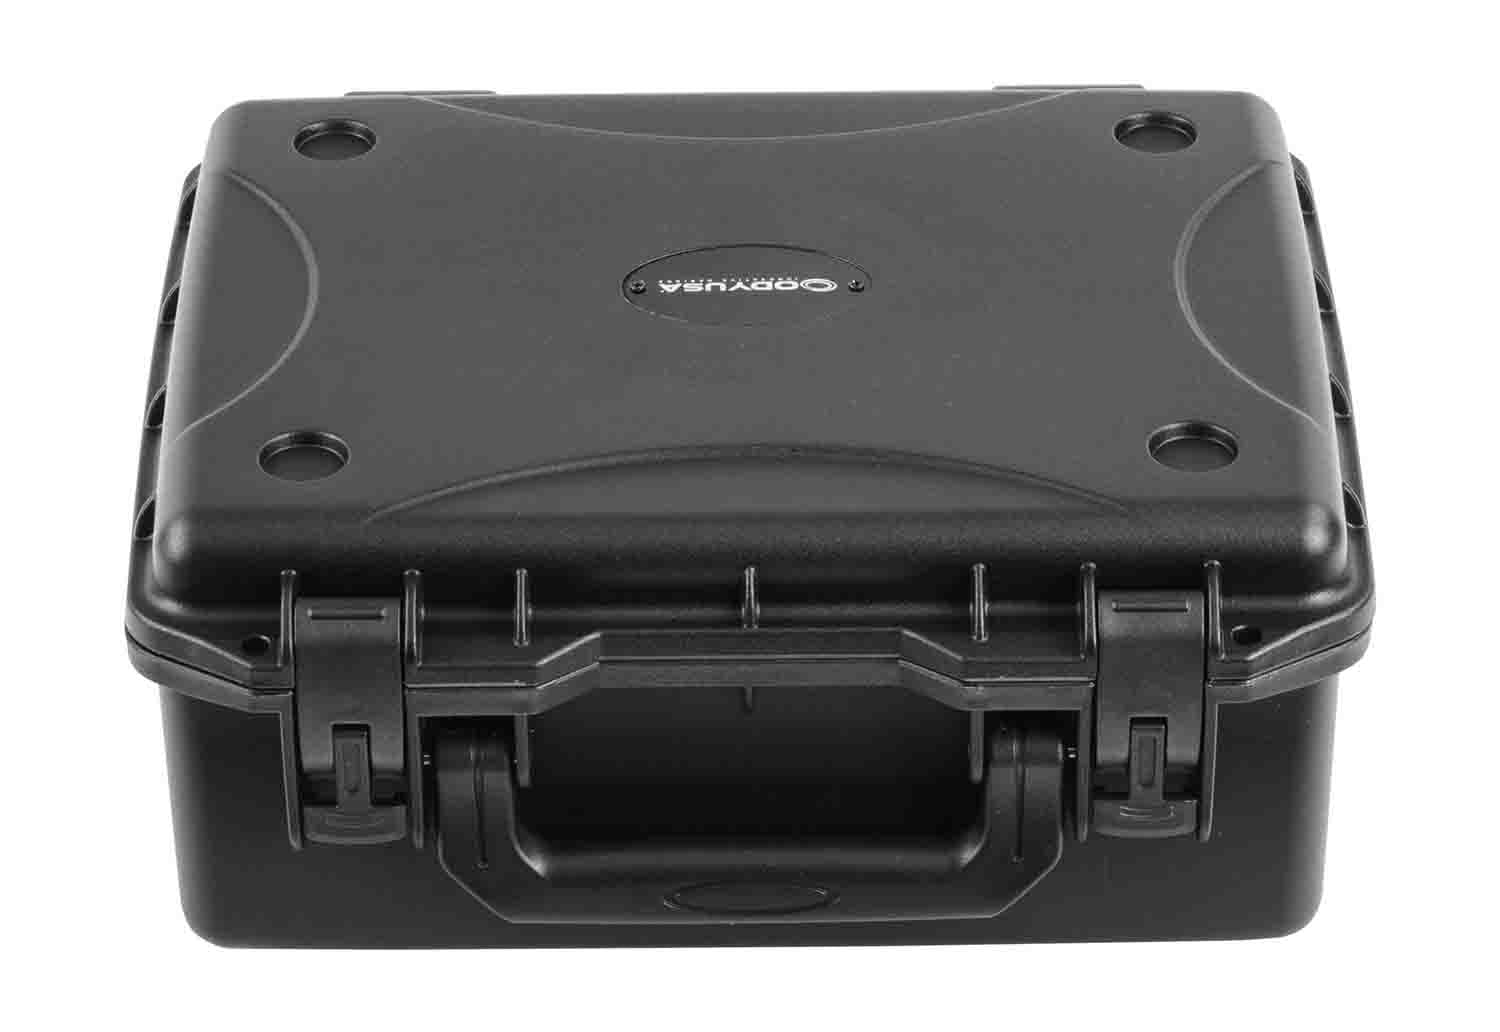 Odyssey VU110804NF Vulcan Injection-Molded Utility Case - 11 x 8.5 x 3.75" Interior - Hollywood DJ